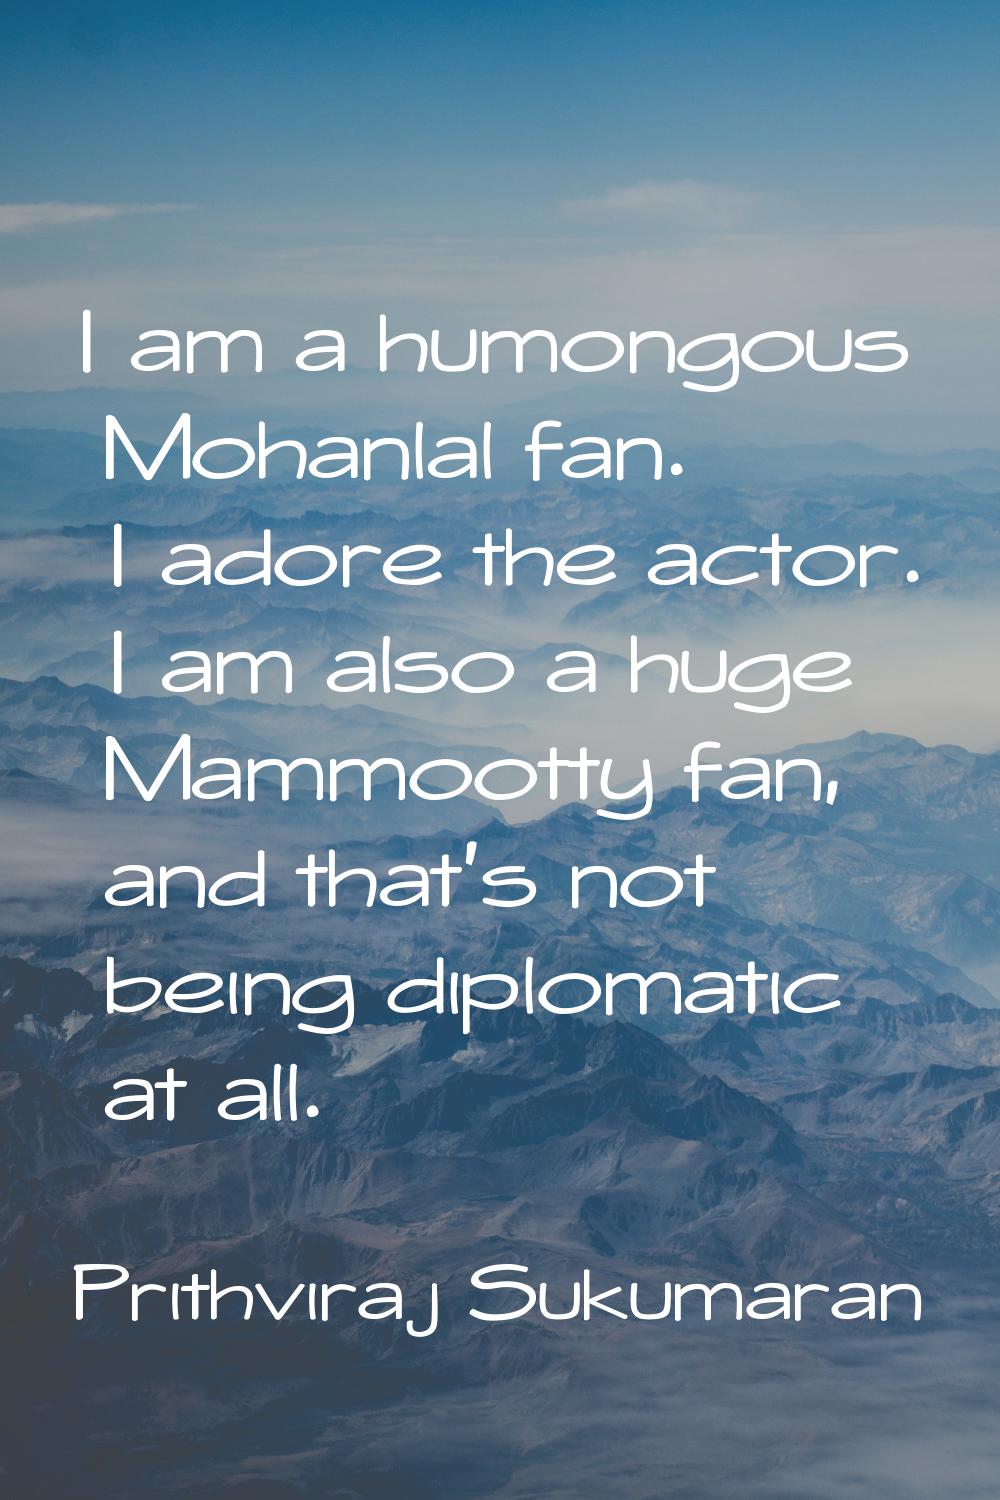 I am a humongous Mohanlal fan. I adore the actor. I am also a huge Mammootty fan, and that's not be